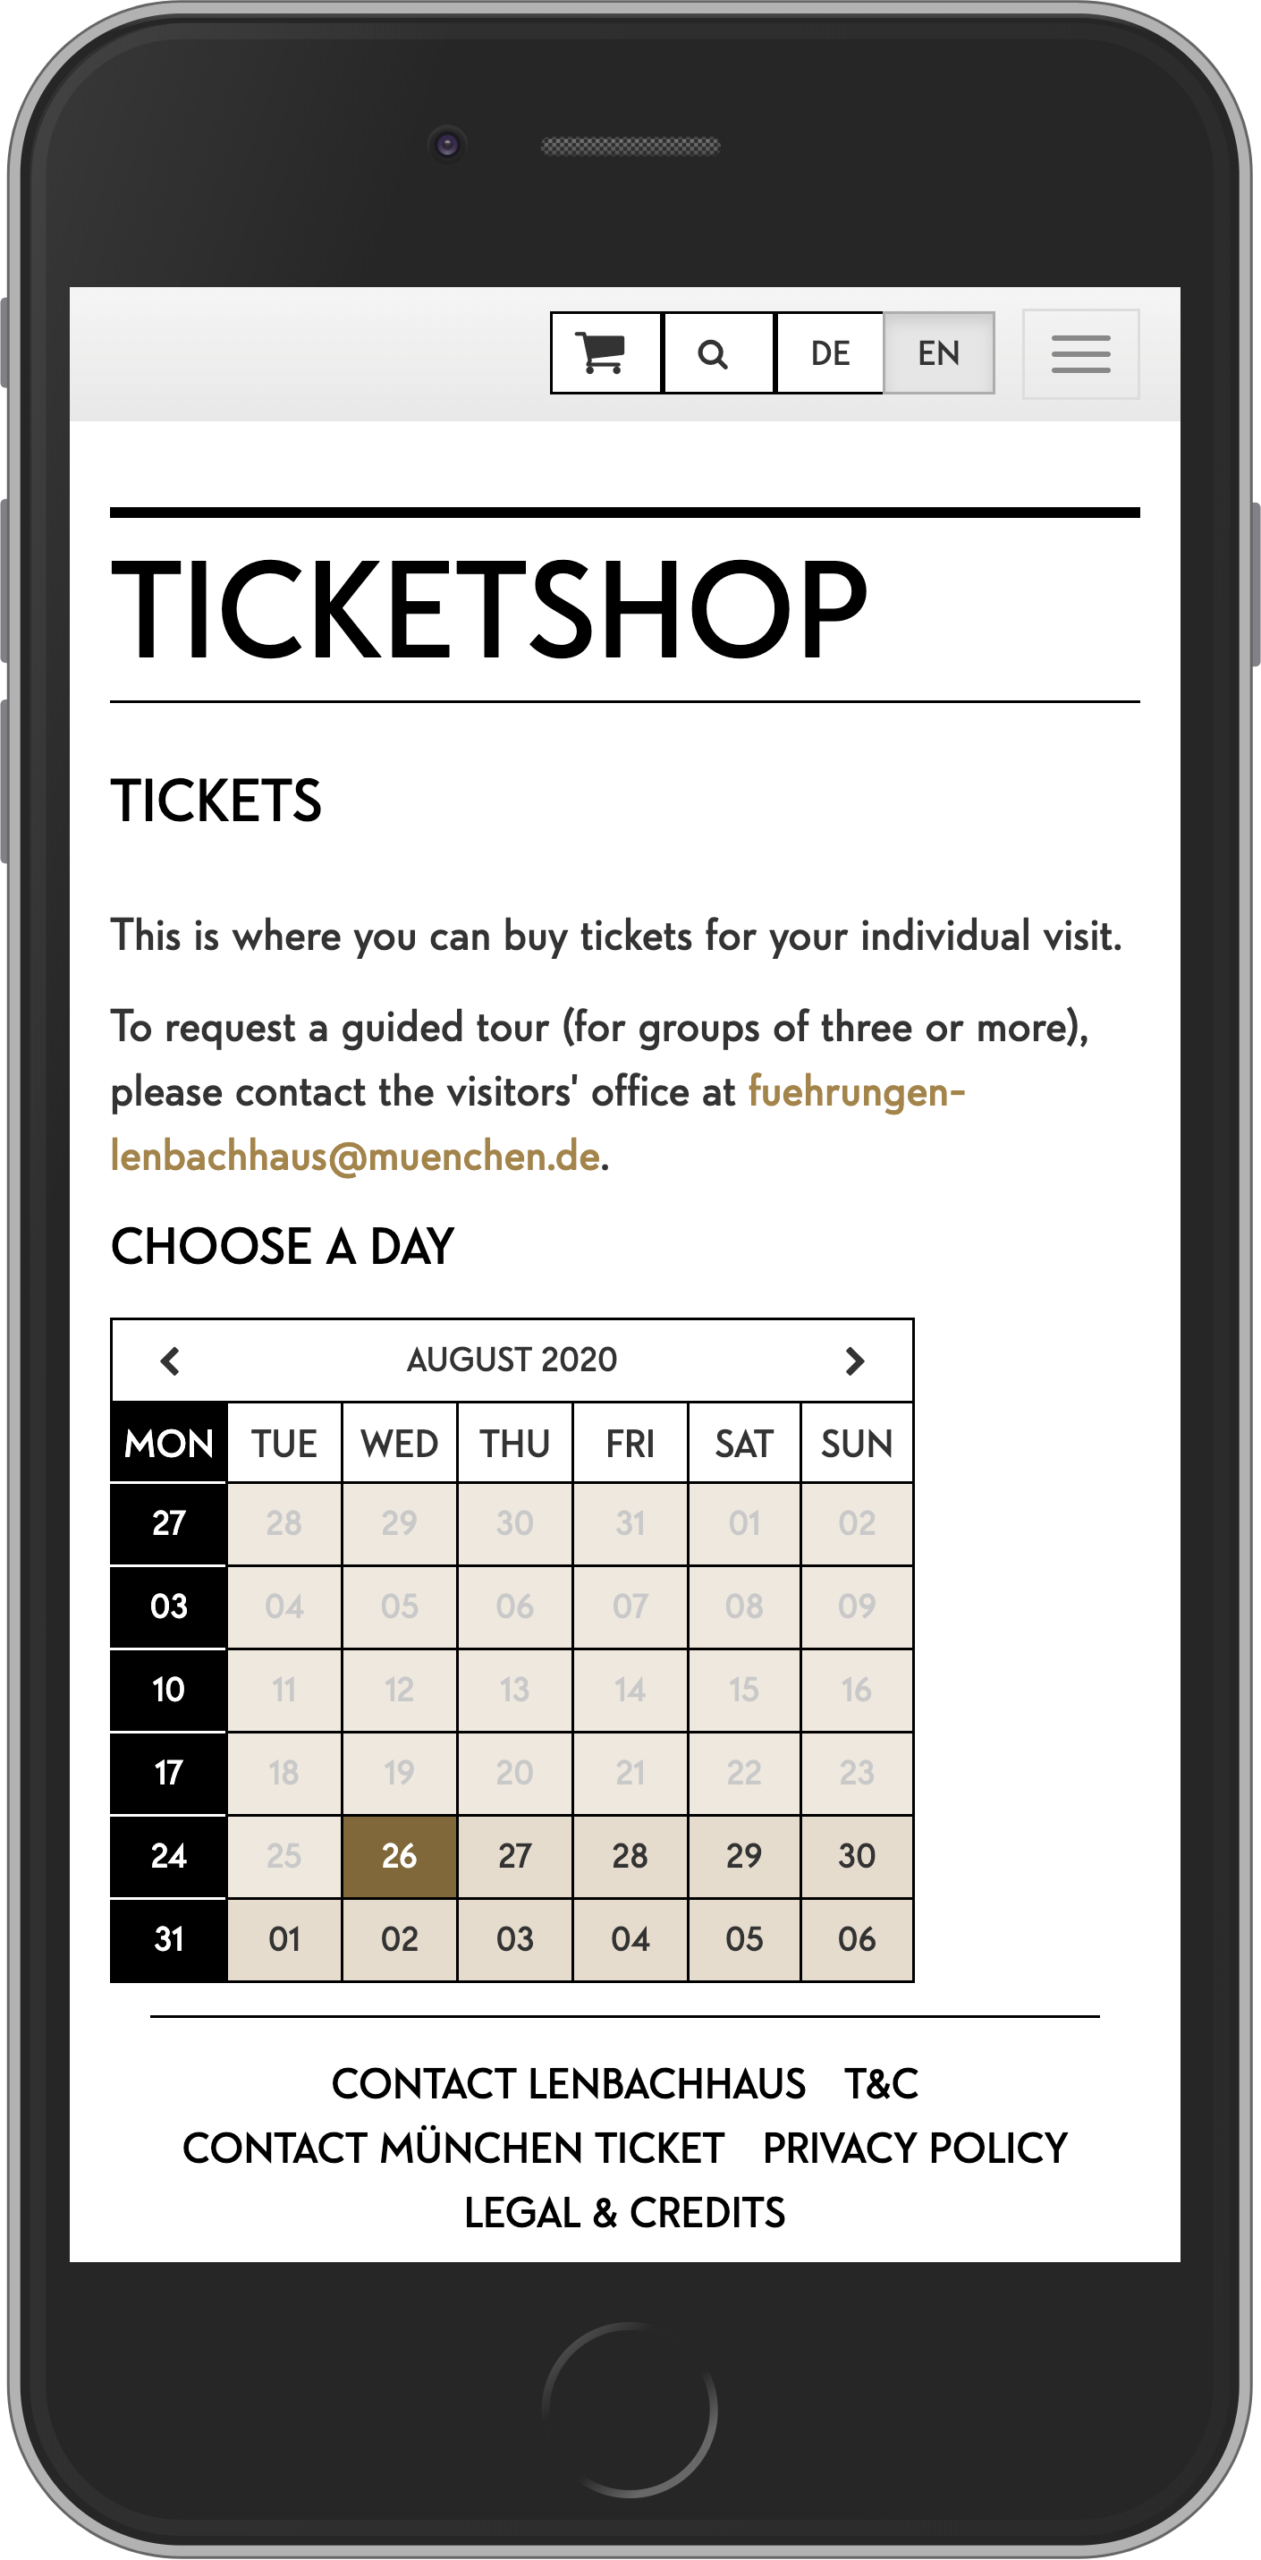 Mobile view of date selection in ticket buying process for tickets in online shop of Lenbachhaus Munich